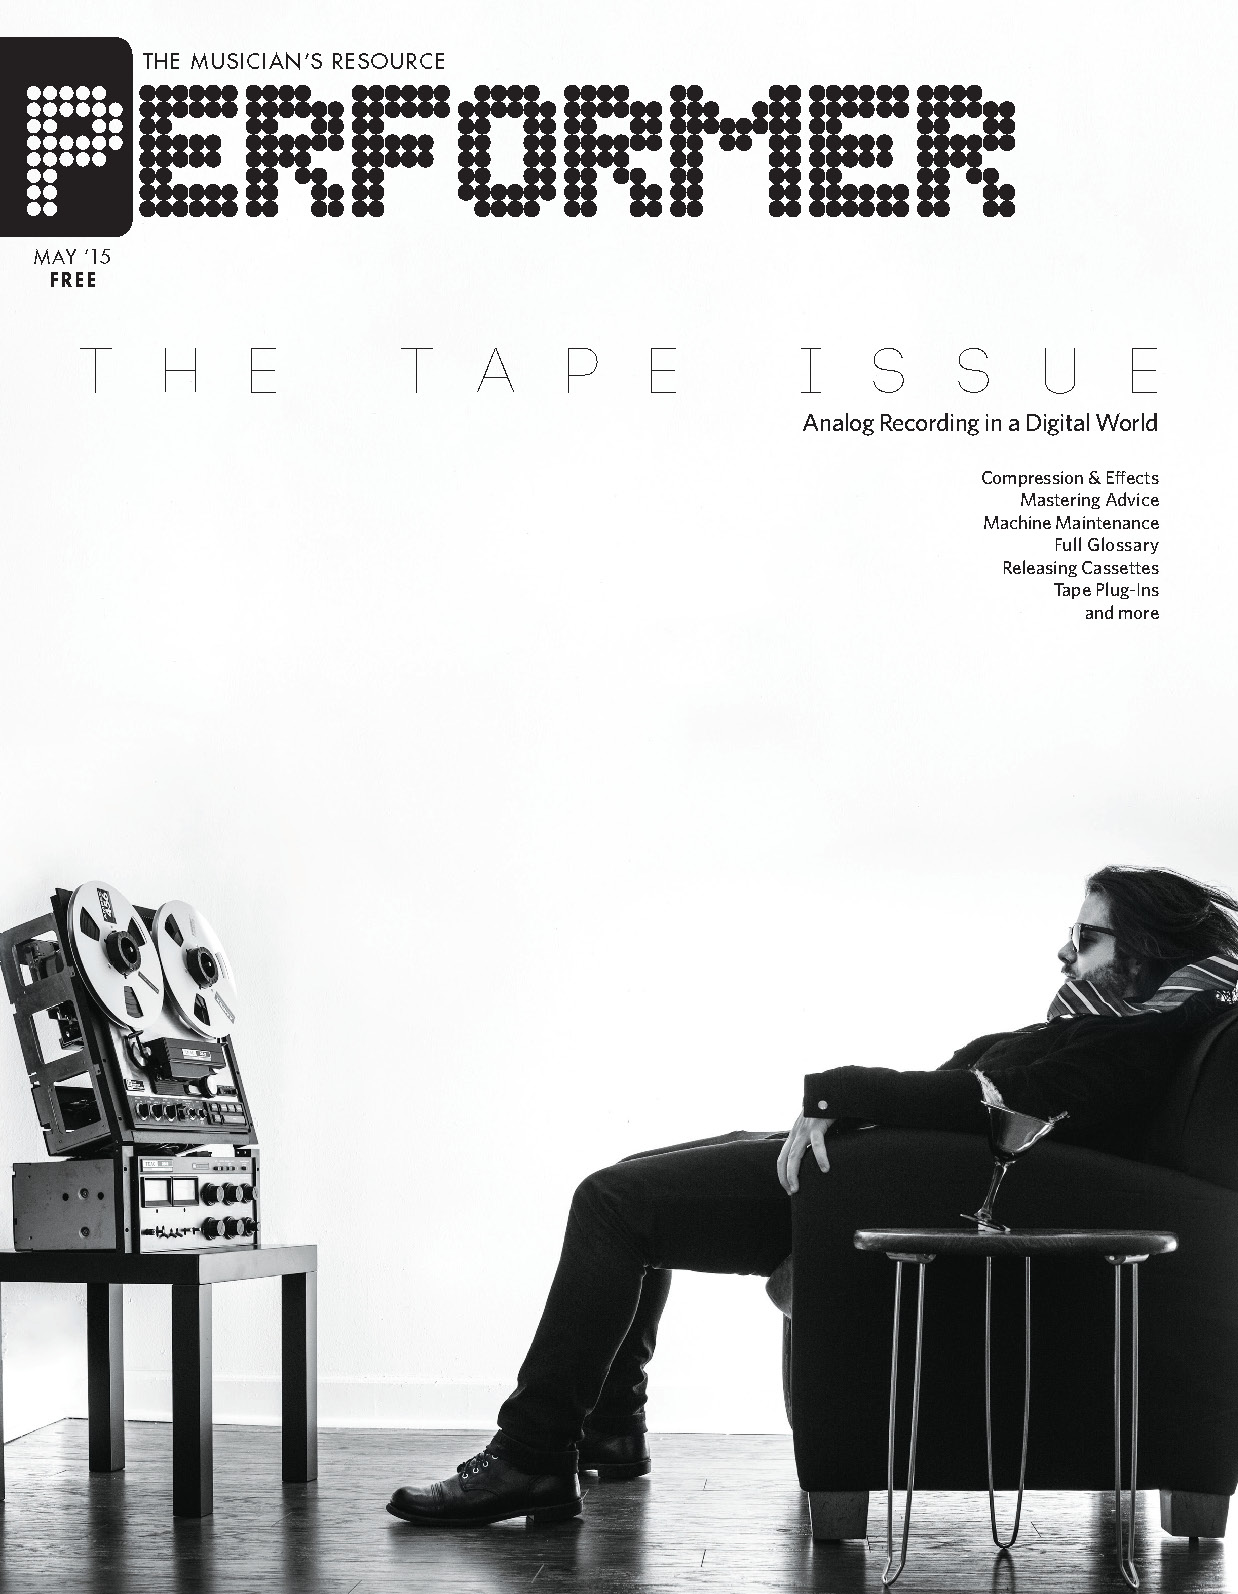 The Analog Tape Issue Is Out Today!